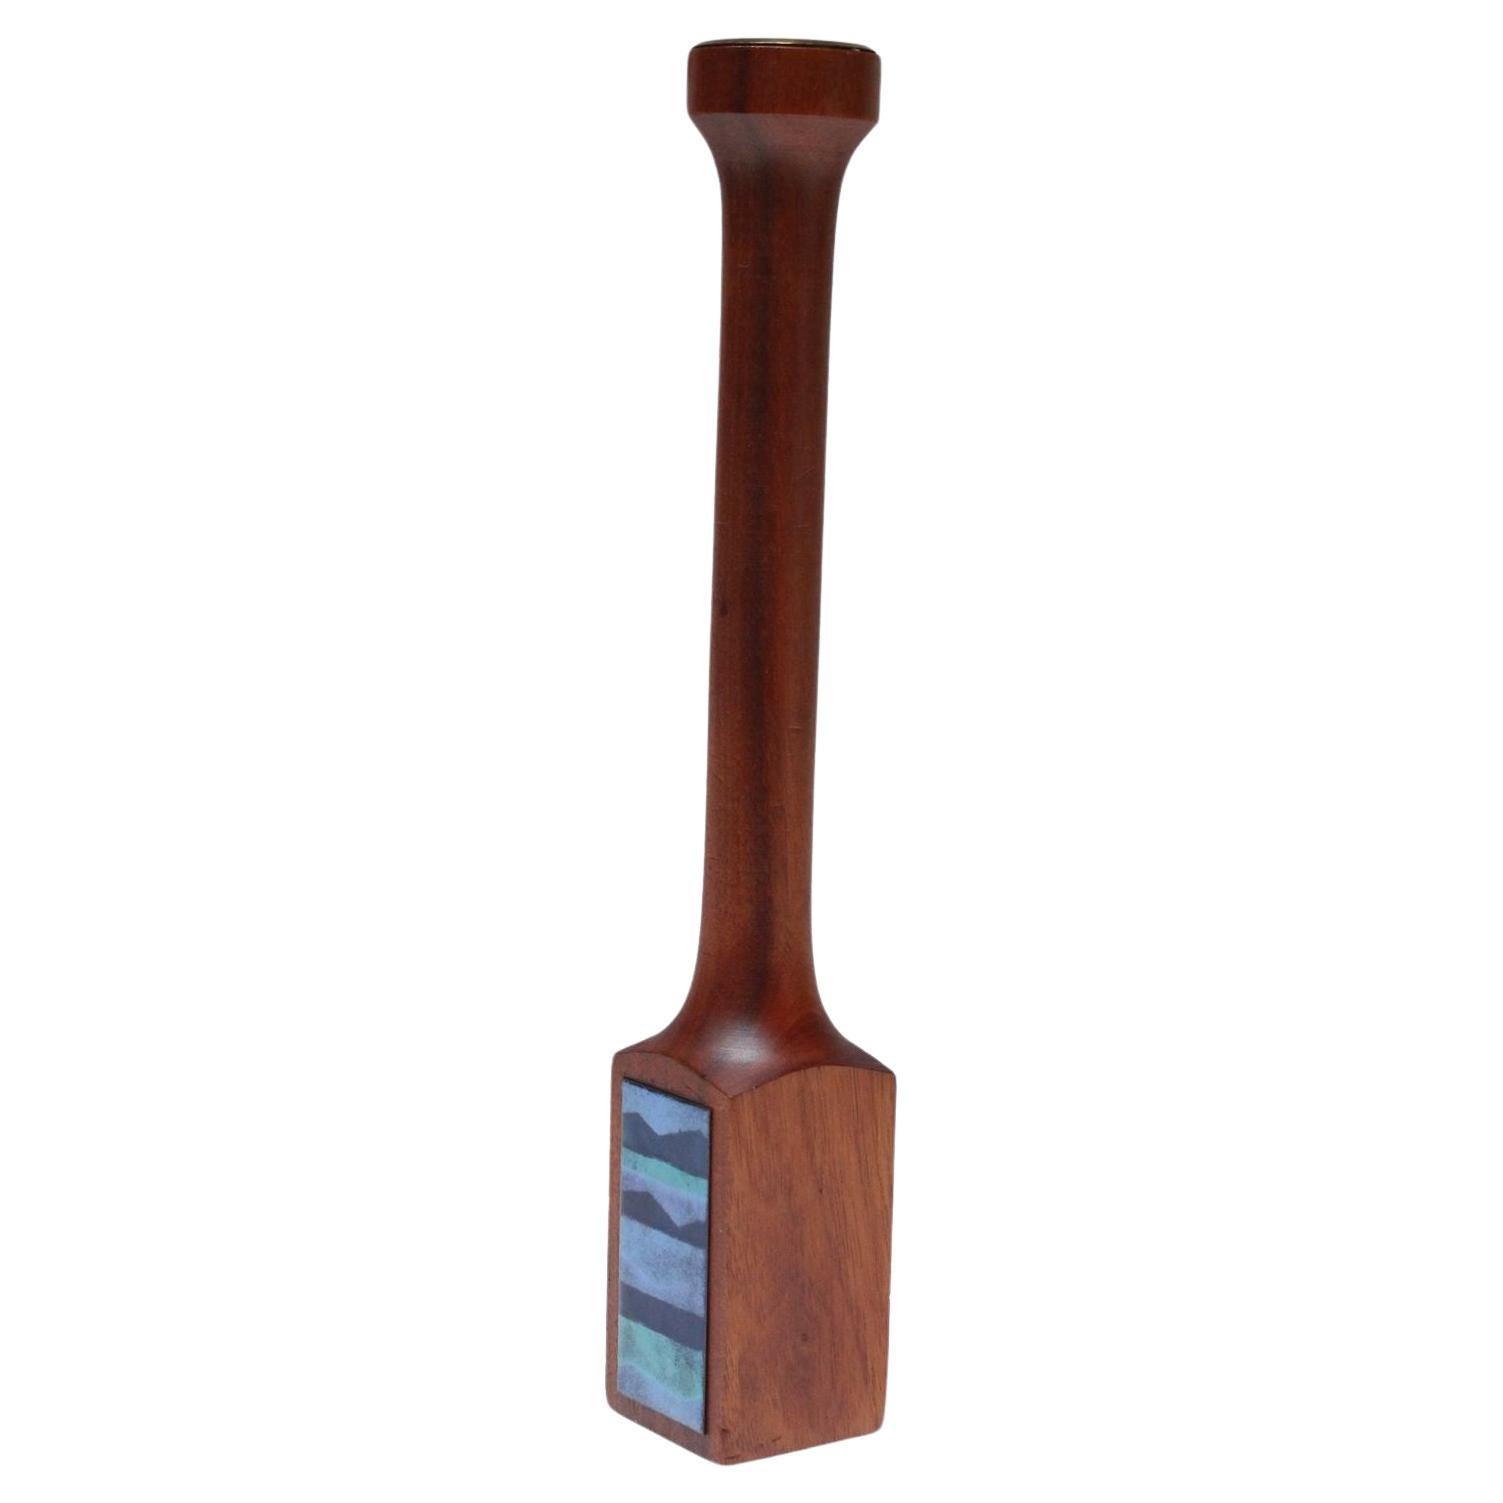 Tall Mid-Century Modern Sculpted Walnut and Enamel Candleholder by Ernest Sohn For Sale